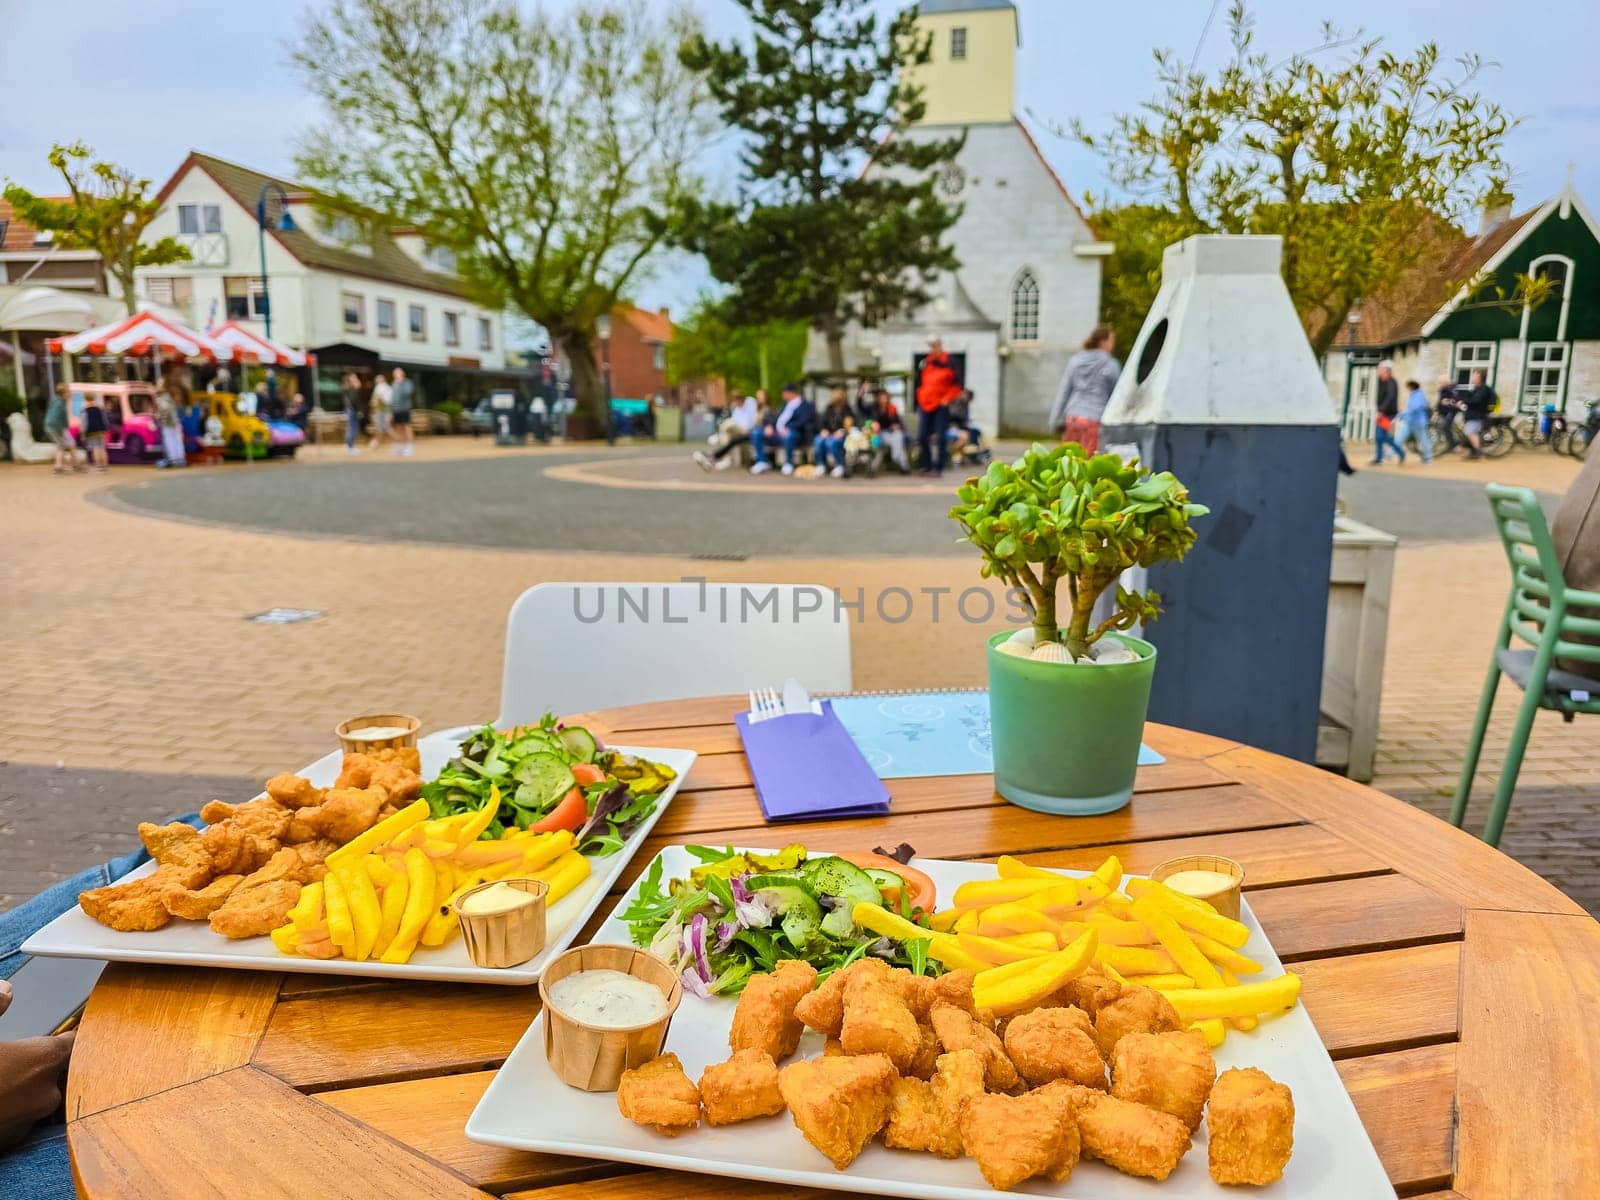 Two beautifully arranged plates of food sit on a table in the bustling town square of Texel, Netherlands, ready to be enjoyed by hungry diners.